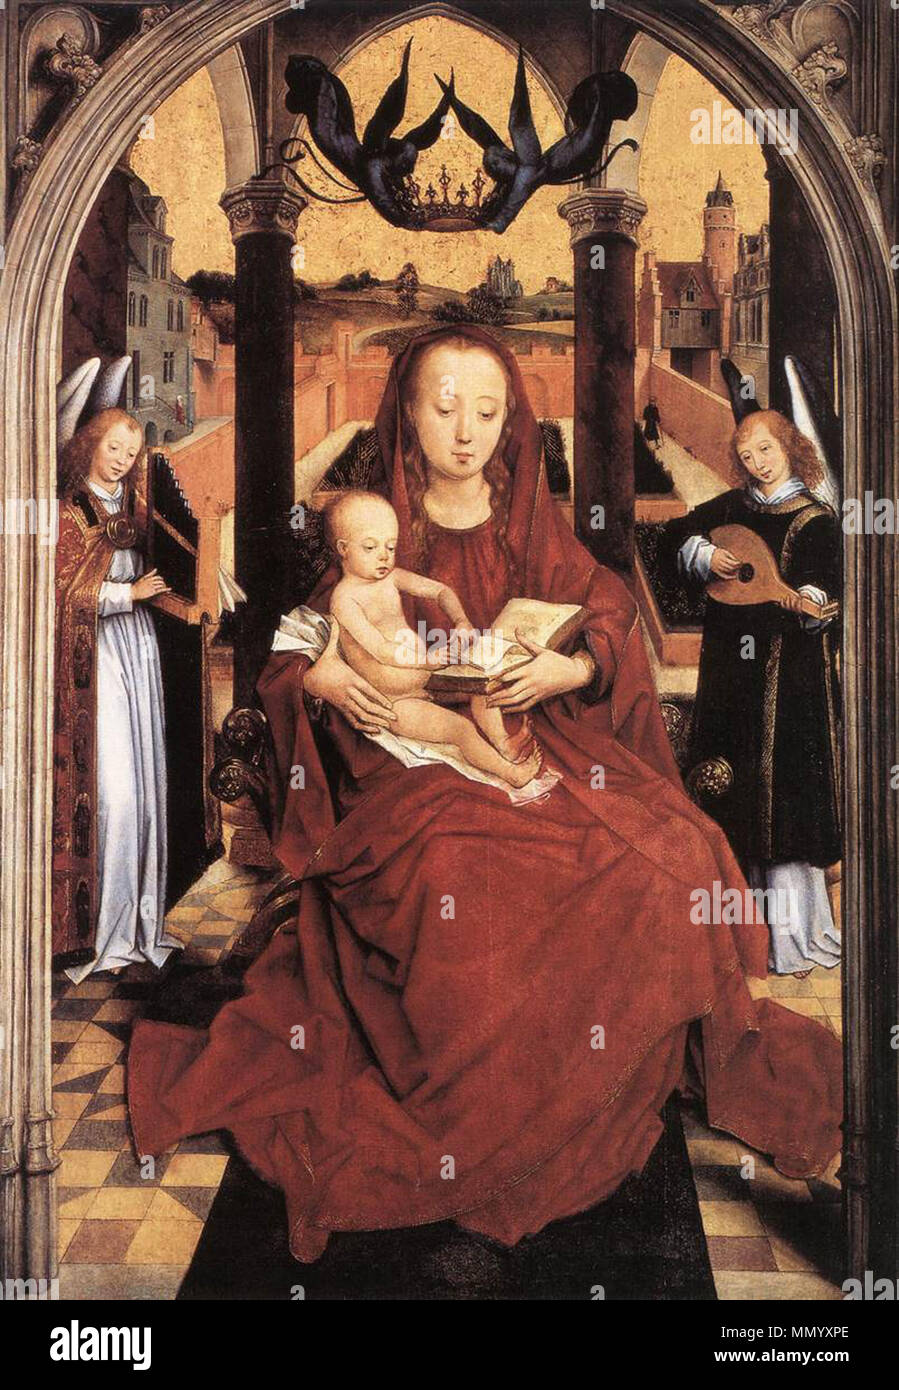 Virgin and Child Enthroned with two Musical Angels. between 1465 and 1467. Hans Memling - Virgin and Child Enthroned with two Musical Angels - WGA14808 Stock Photo